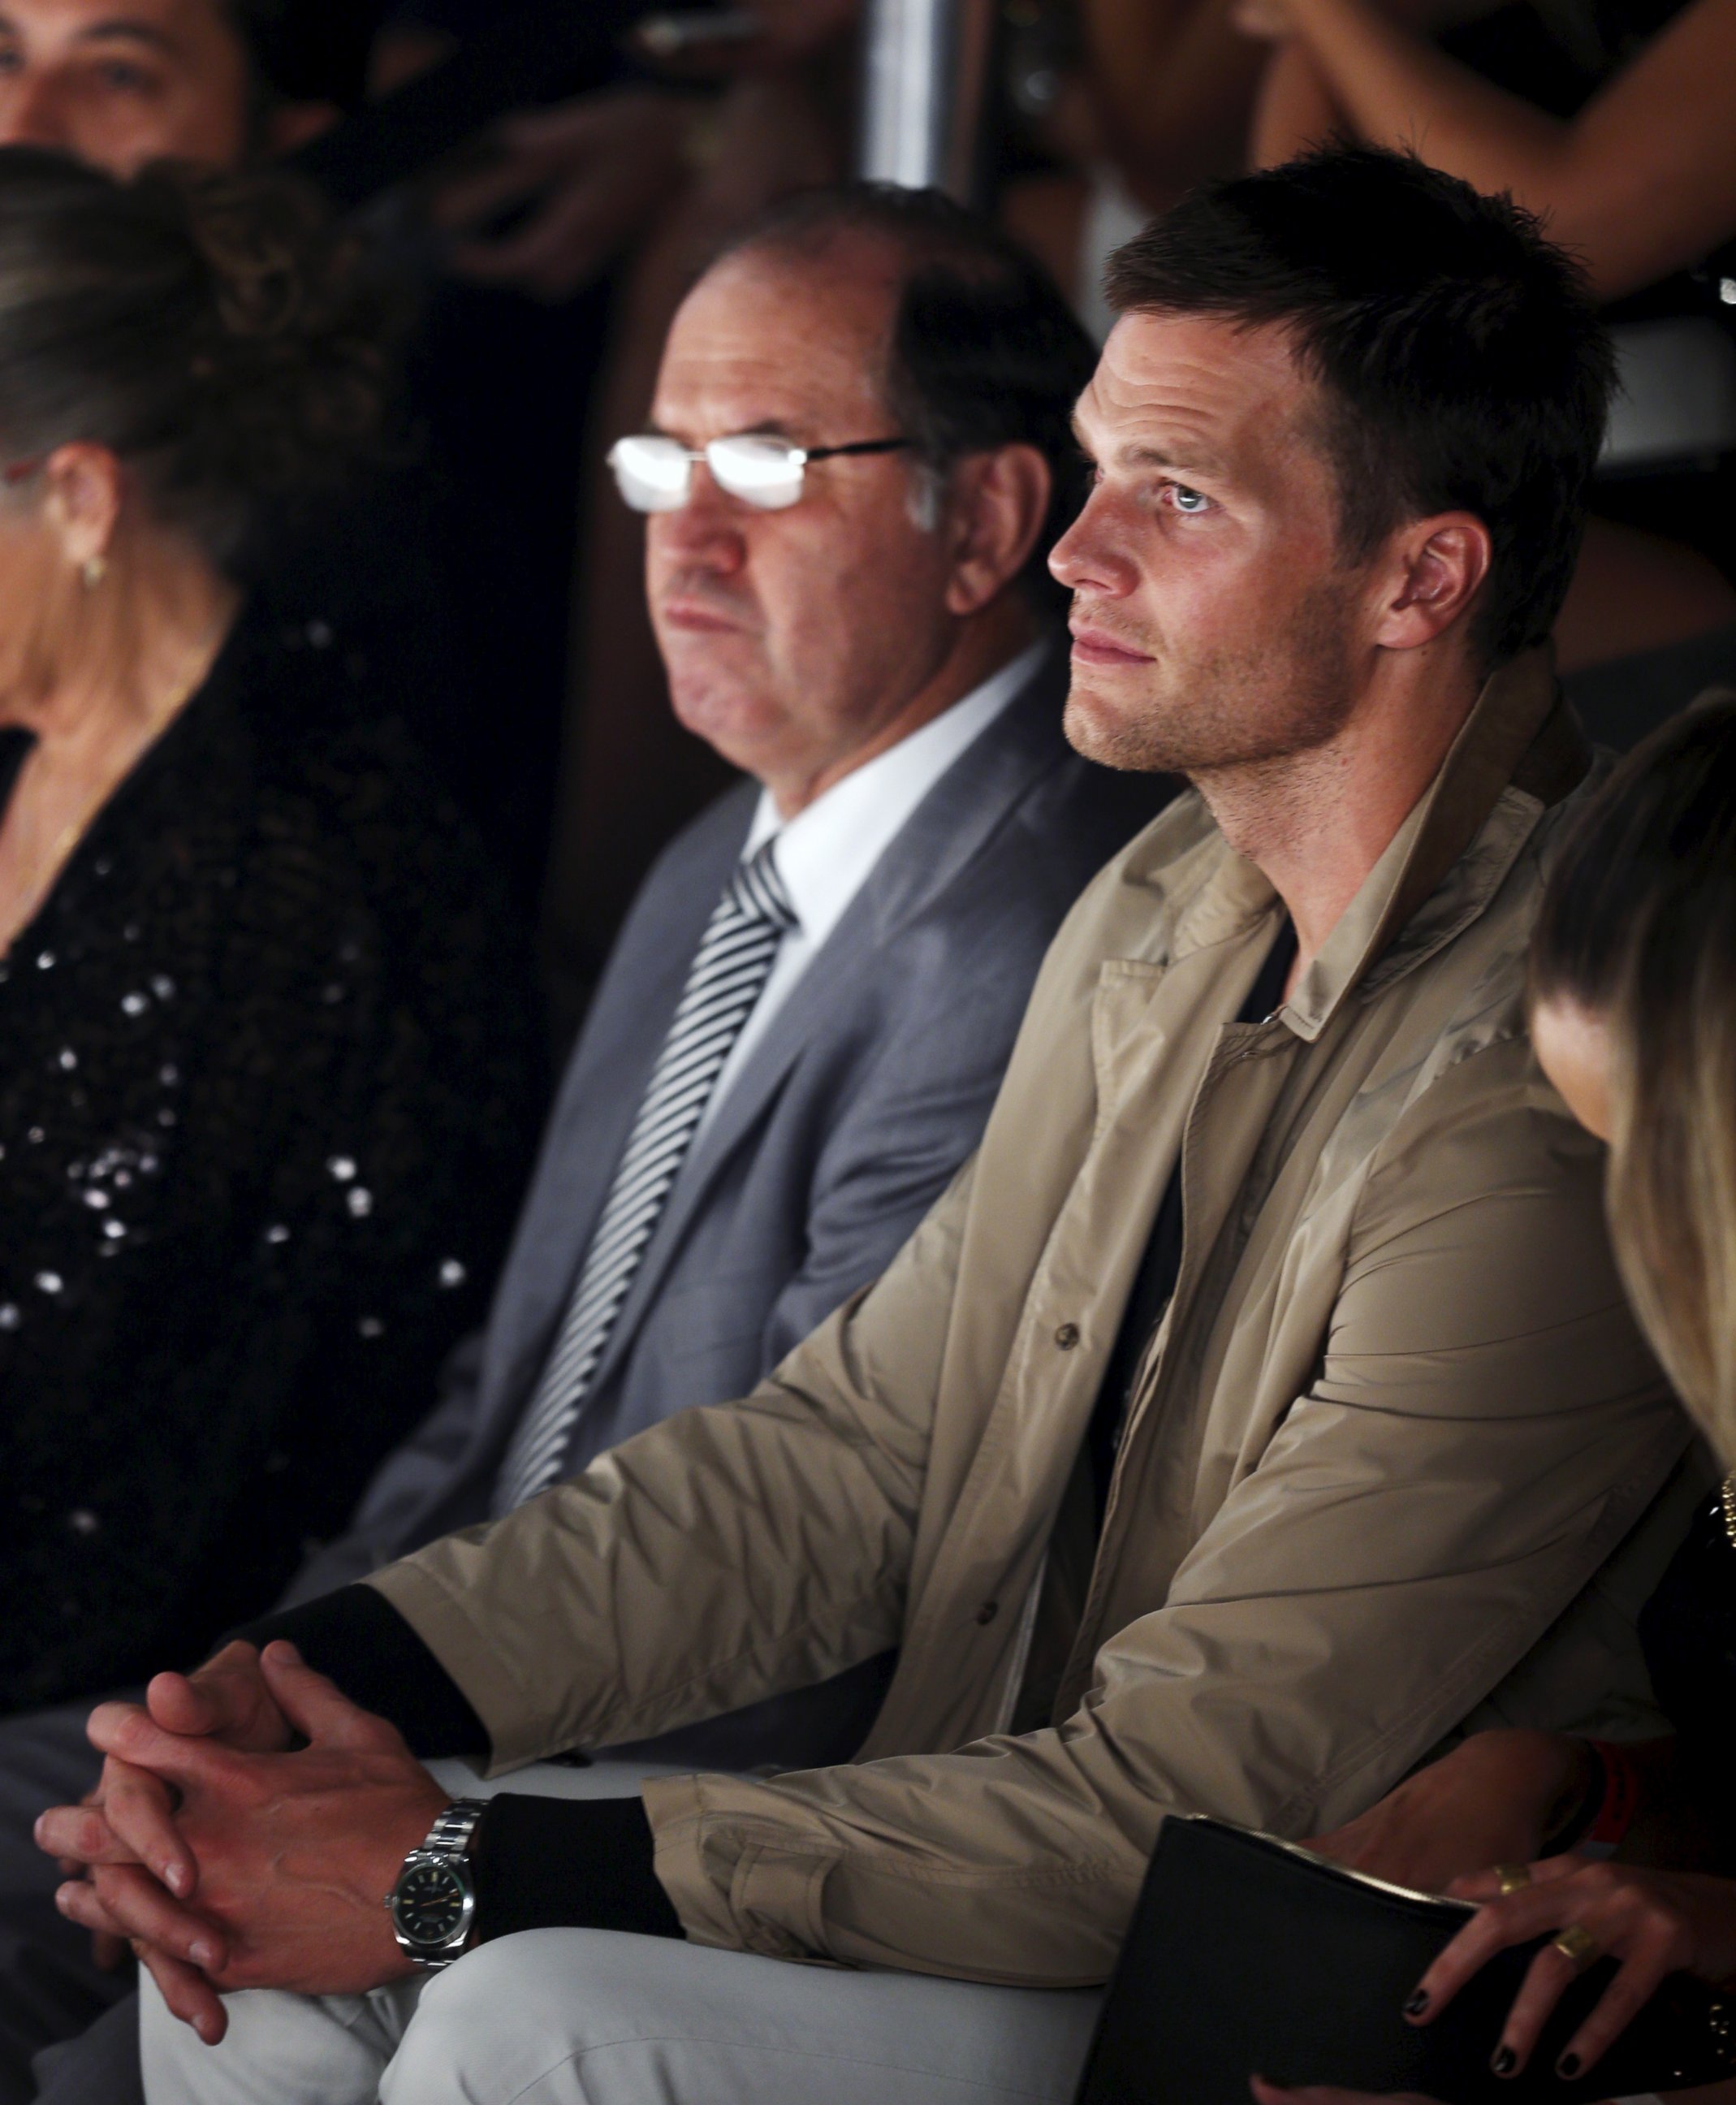 PHOTO: NFL player Tom Brady watches his wife model Gisele Bundchen as she presents creations for the Colcci Summer 2016 collection during Sao Paulo Fashion Week in Sao Paulo April 15, 2015.